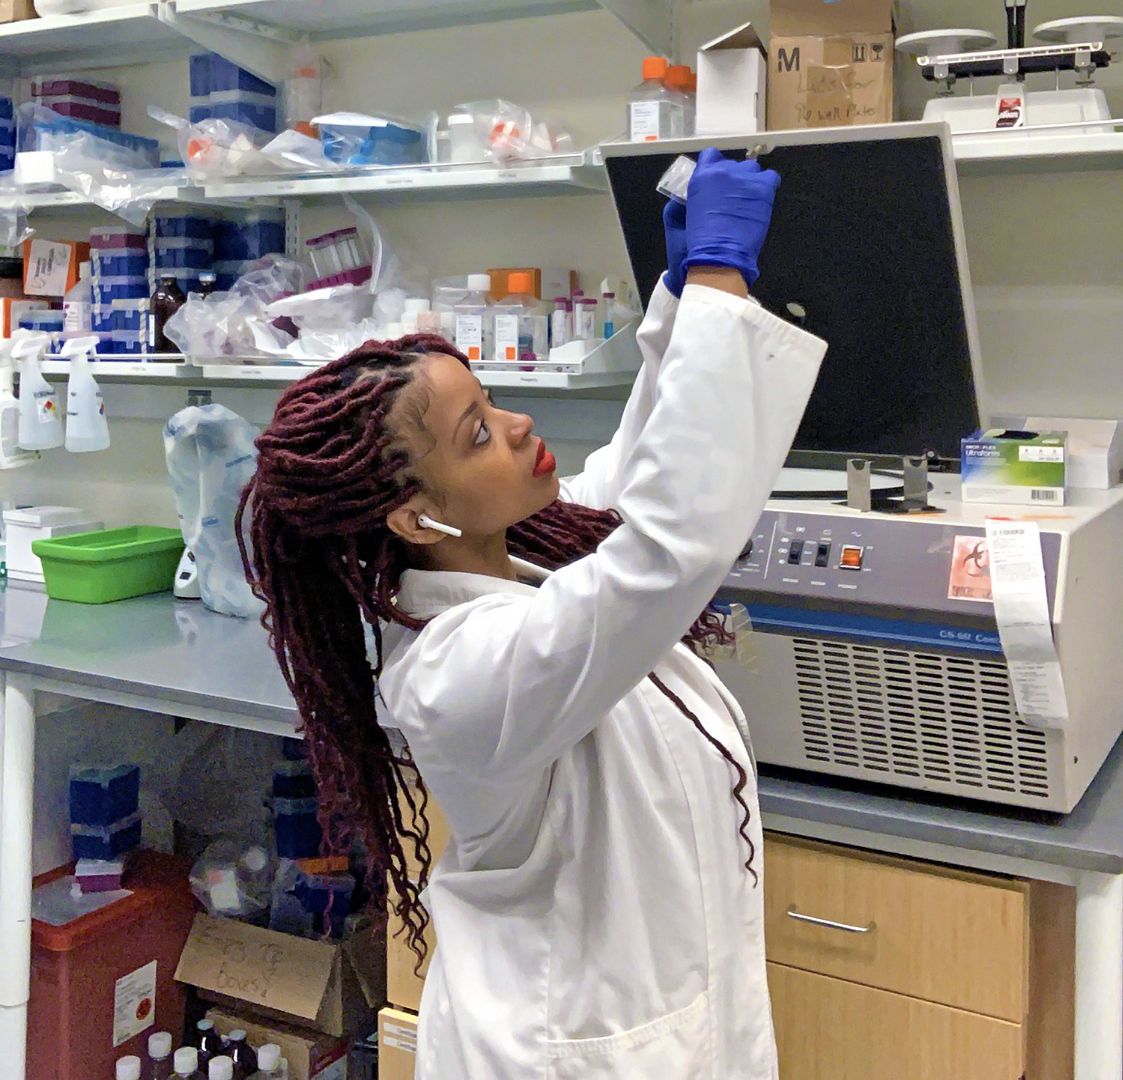 Aisha Hill, a lead research specialist and scientist at Emory University's School of Medicine, conducting research in a lab.